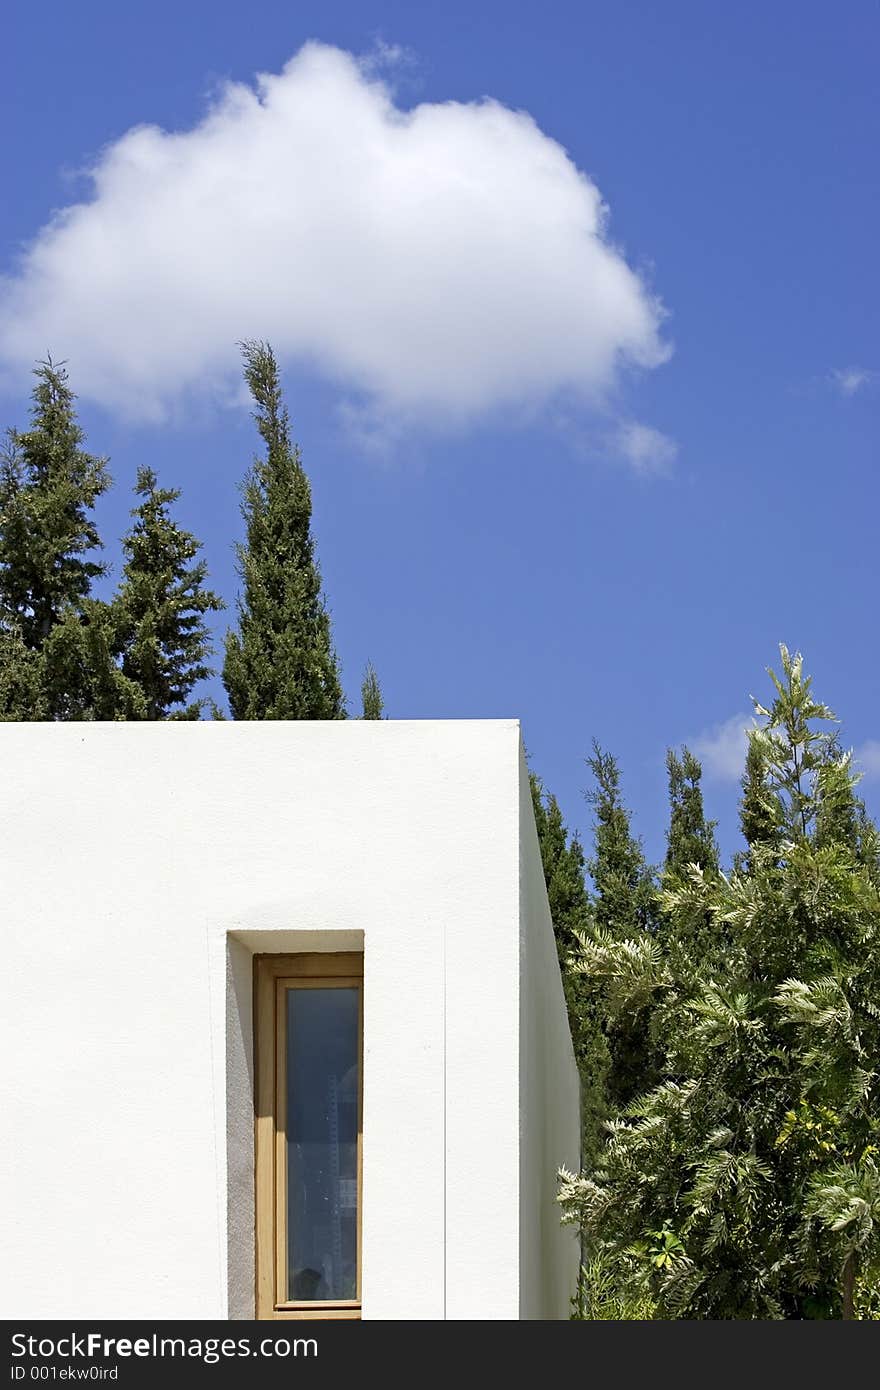 New, white building with slim window, fir trees and blue sky with one cloud. New, white building with slim window, fir trees and blue sky with one cloud